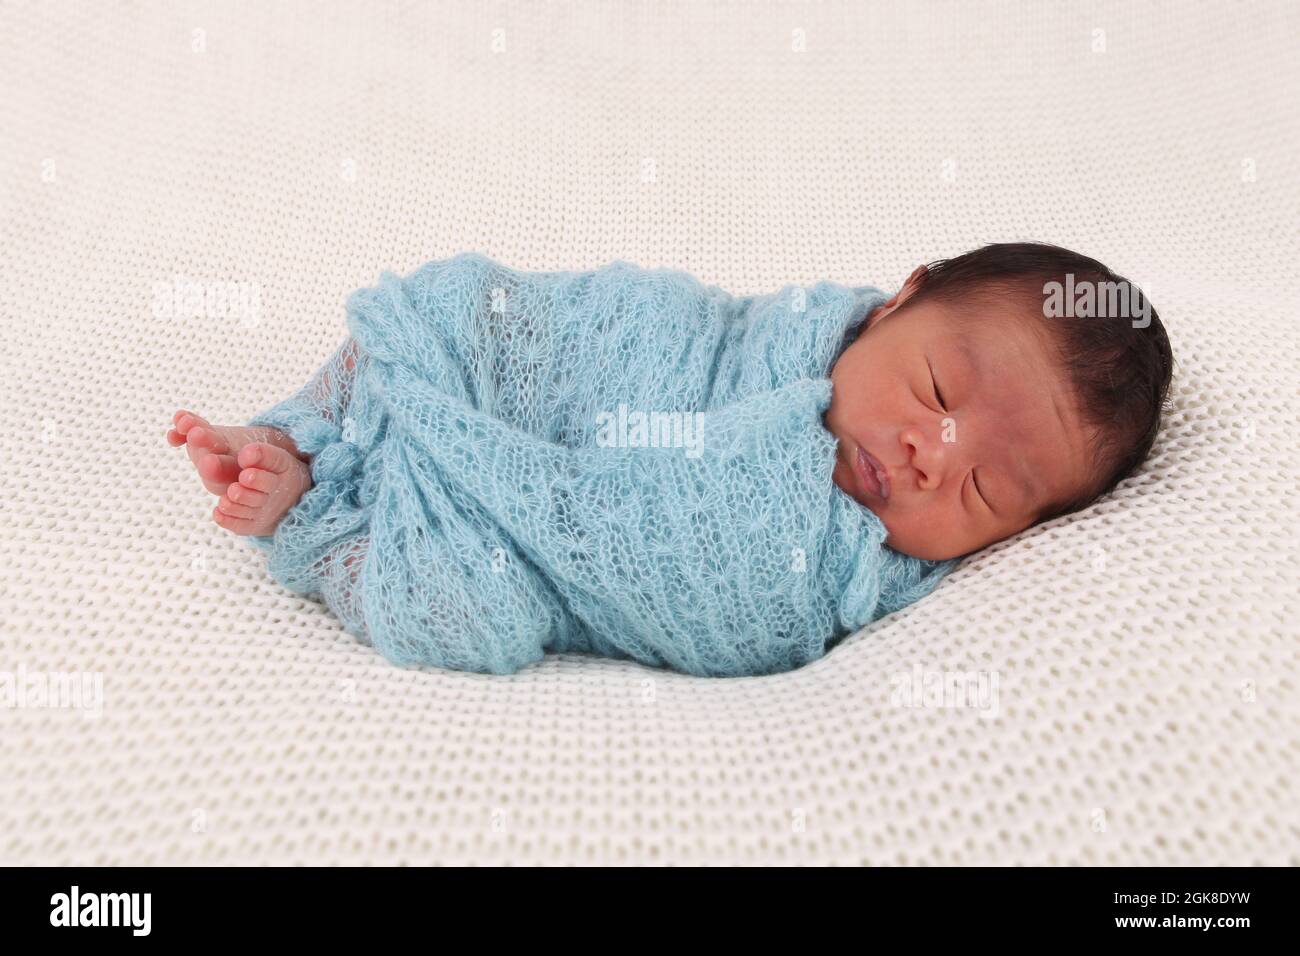 child with parents of Philippines ethnicity baby born in the UK, new born baby boy Stock Photo